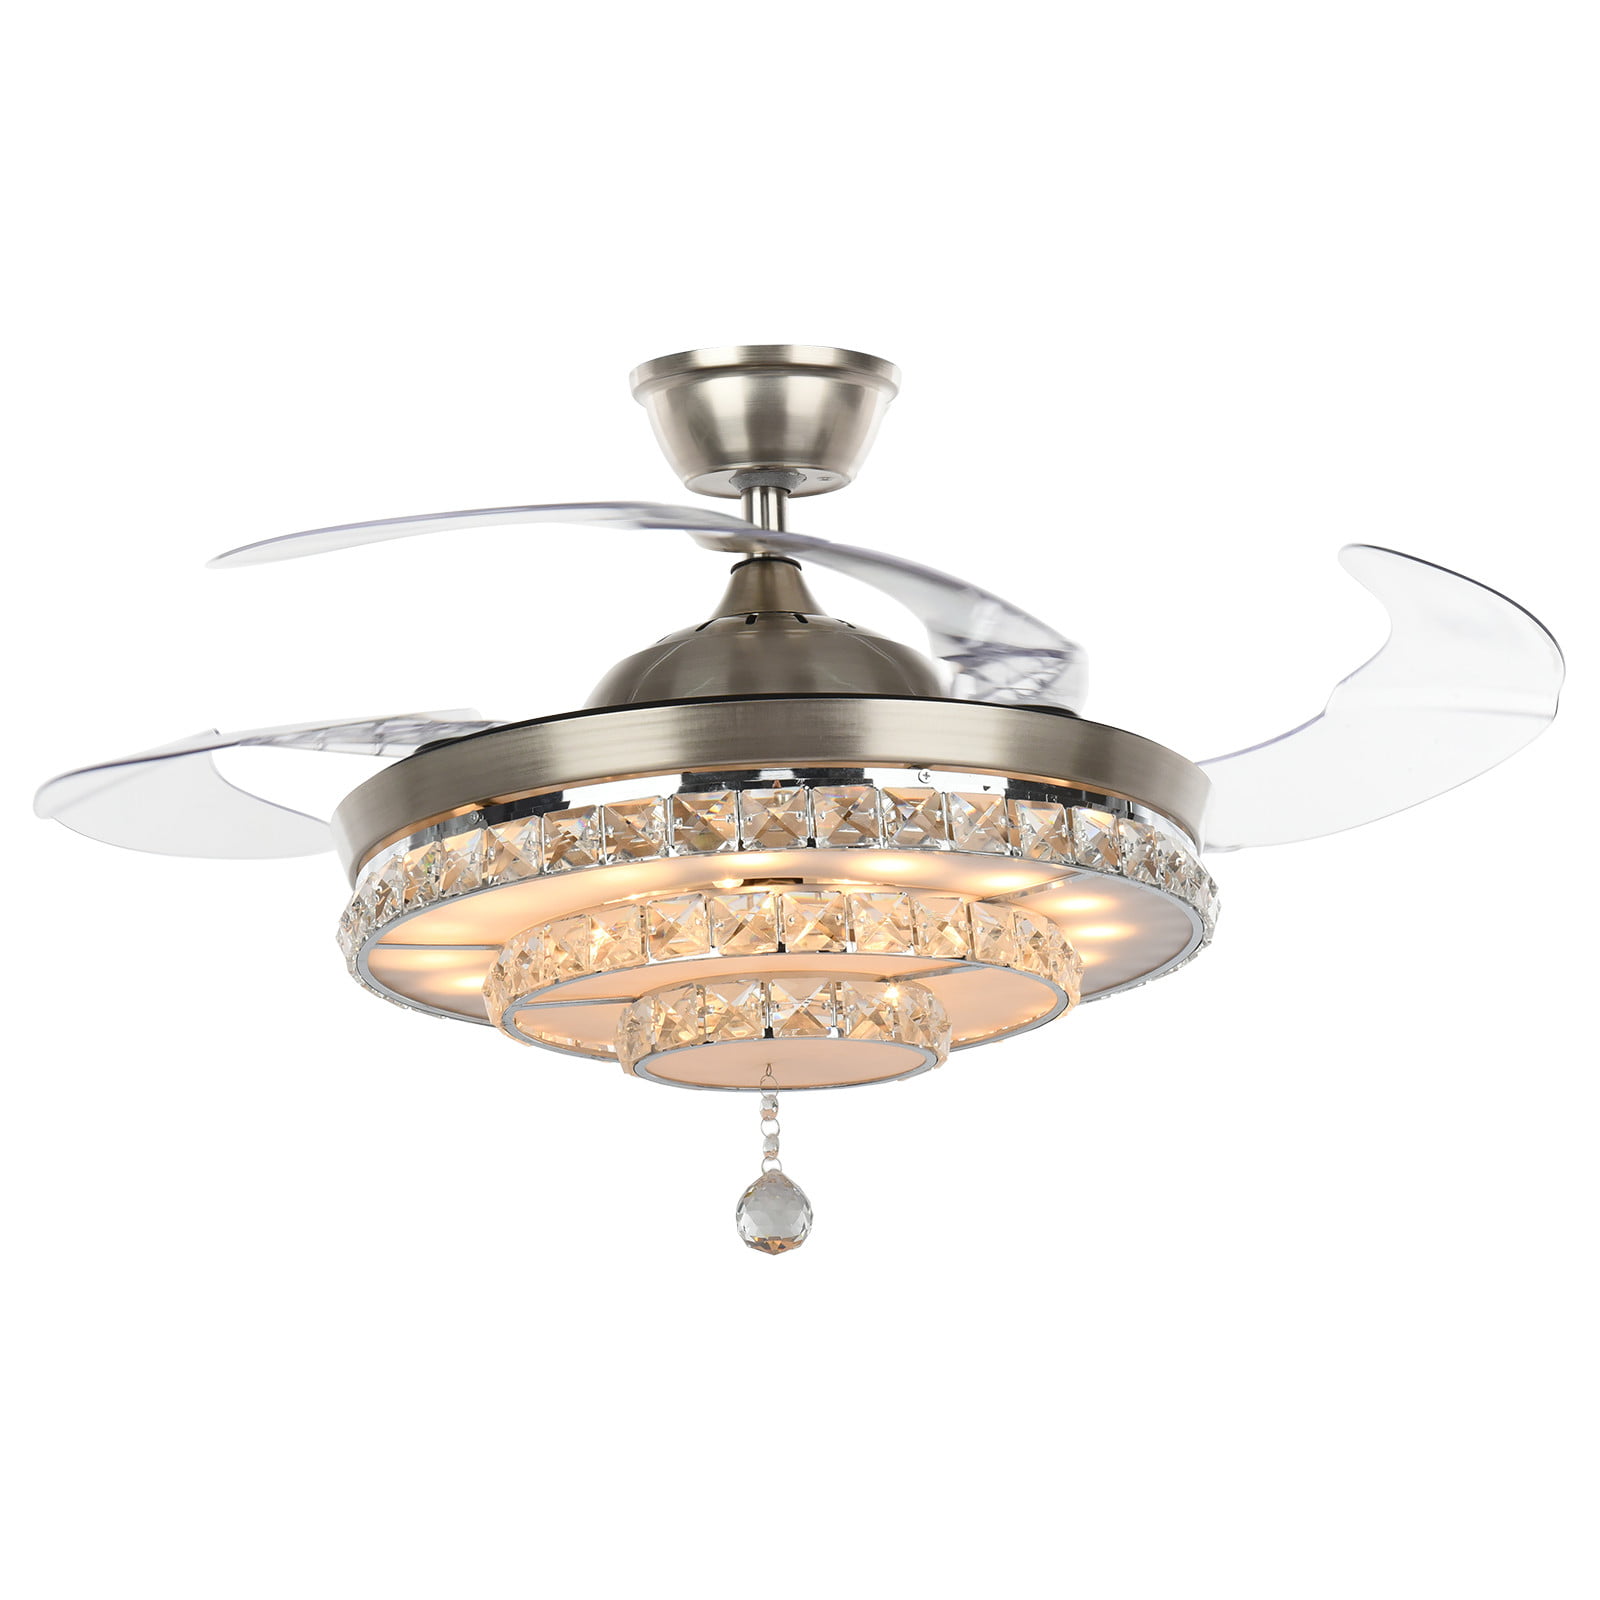 Details about   New 42" Golden Crystal Acrylic Blade Ceiling Fan W/ Light Retractable Invisible 